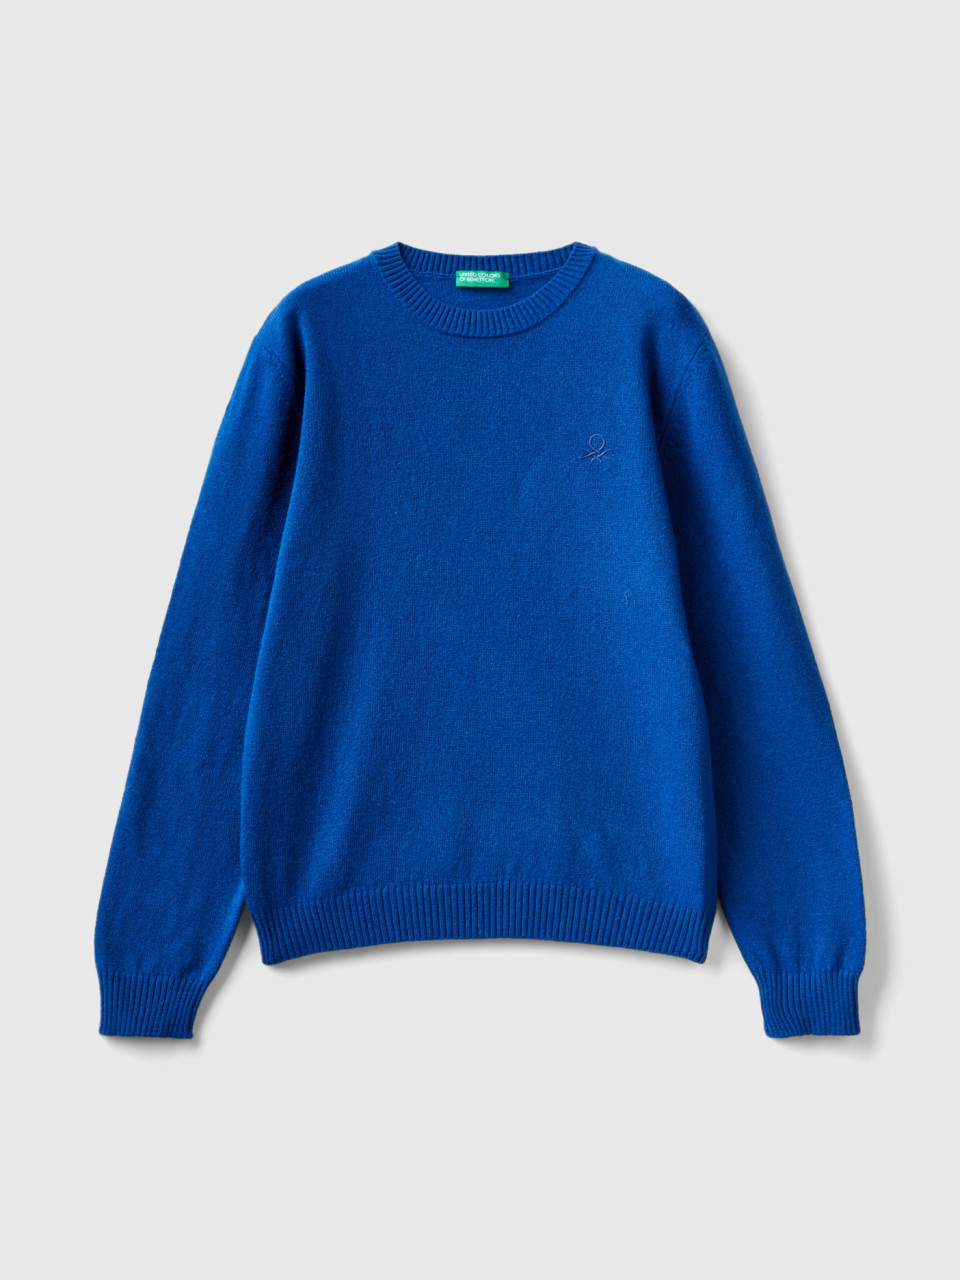 Benetton, Sweater In Cashmere And Wool Blend, Blue, Kids